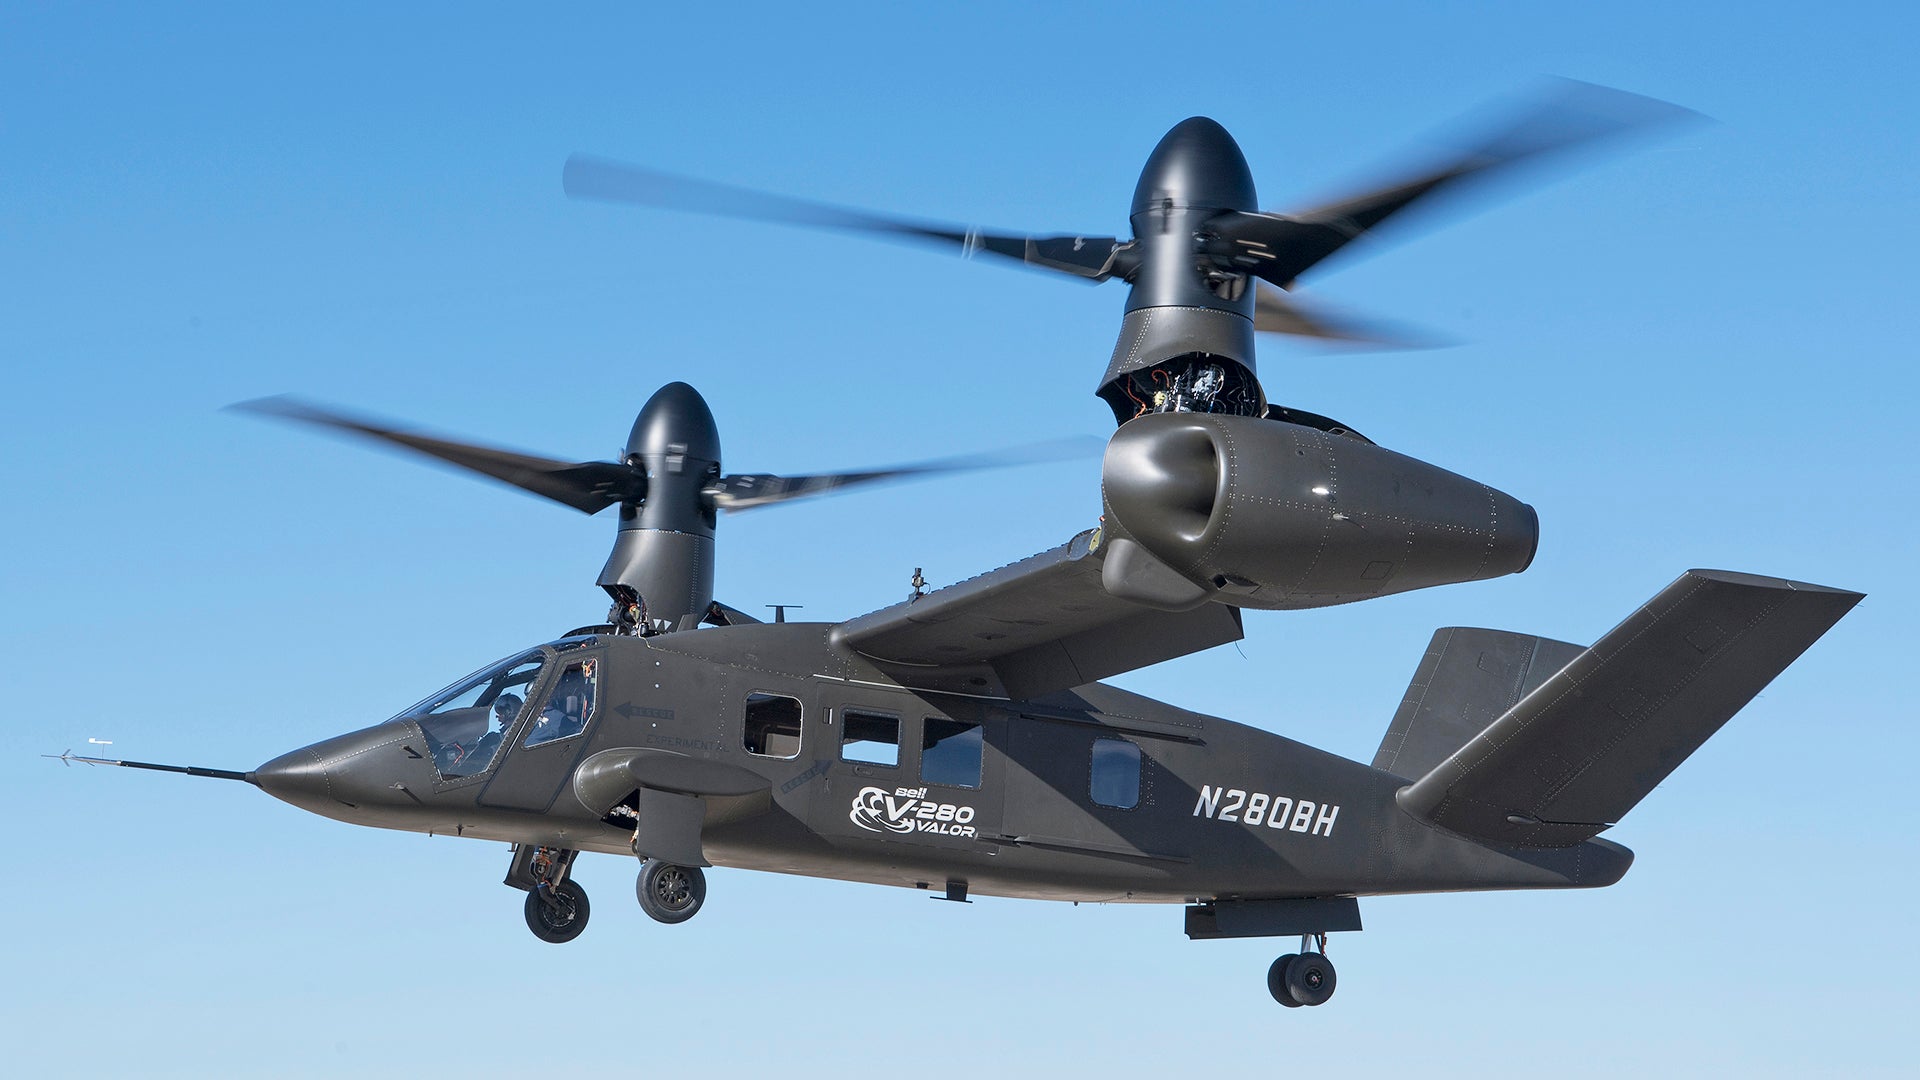 Bell’s V-280 Valor Tilt-Rotor That Aims To Replace The Black Hawk Took Its First Flight